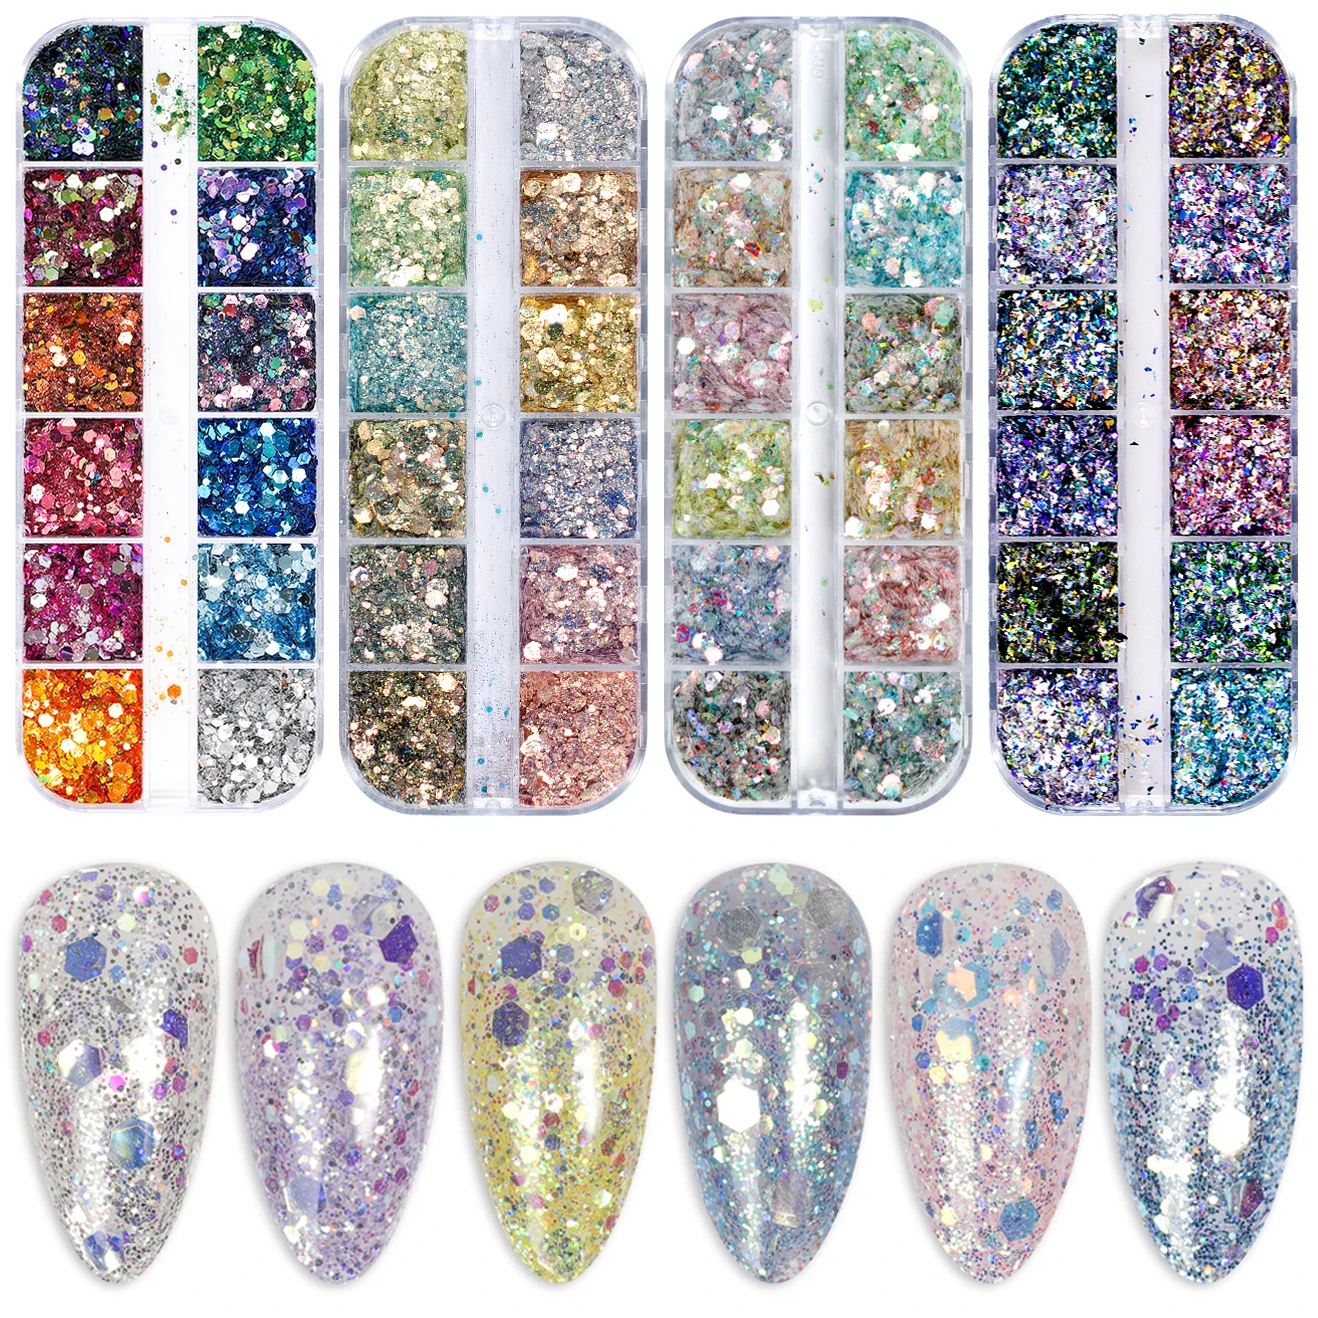 12 Grid Acrylic Nail Art Decorations Sequins Set Euphoria Glitter For Nails Accesorios Decals Manicure Supplies Paillette Ongle